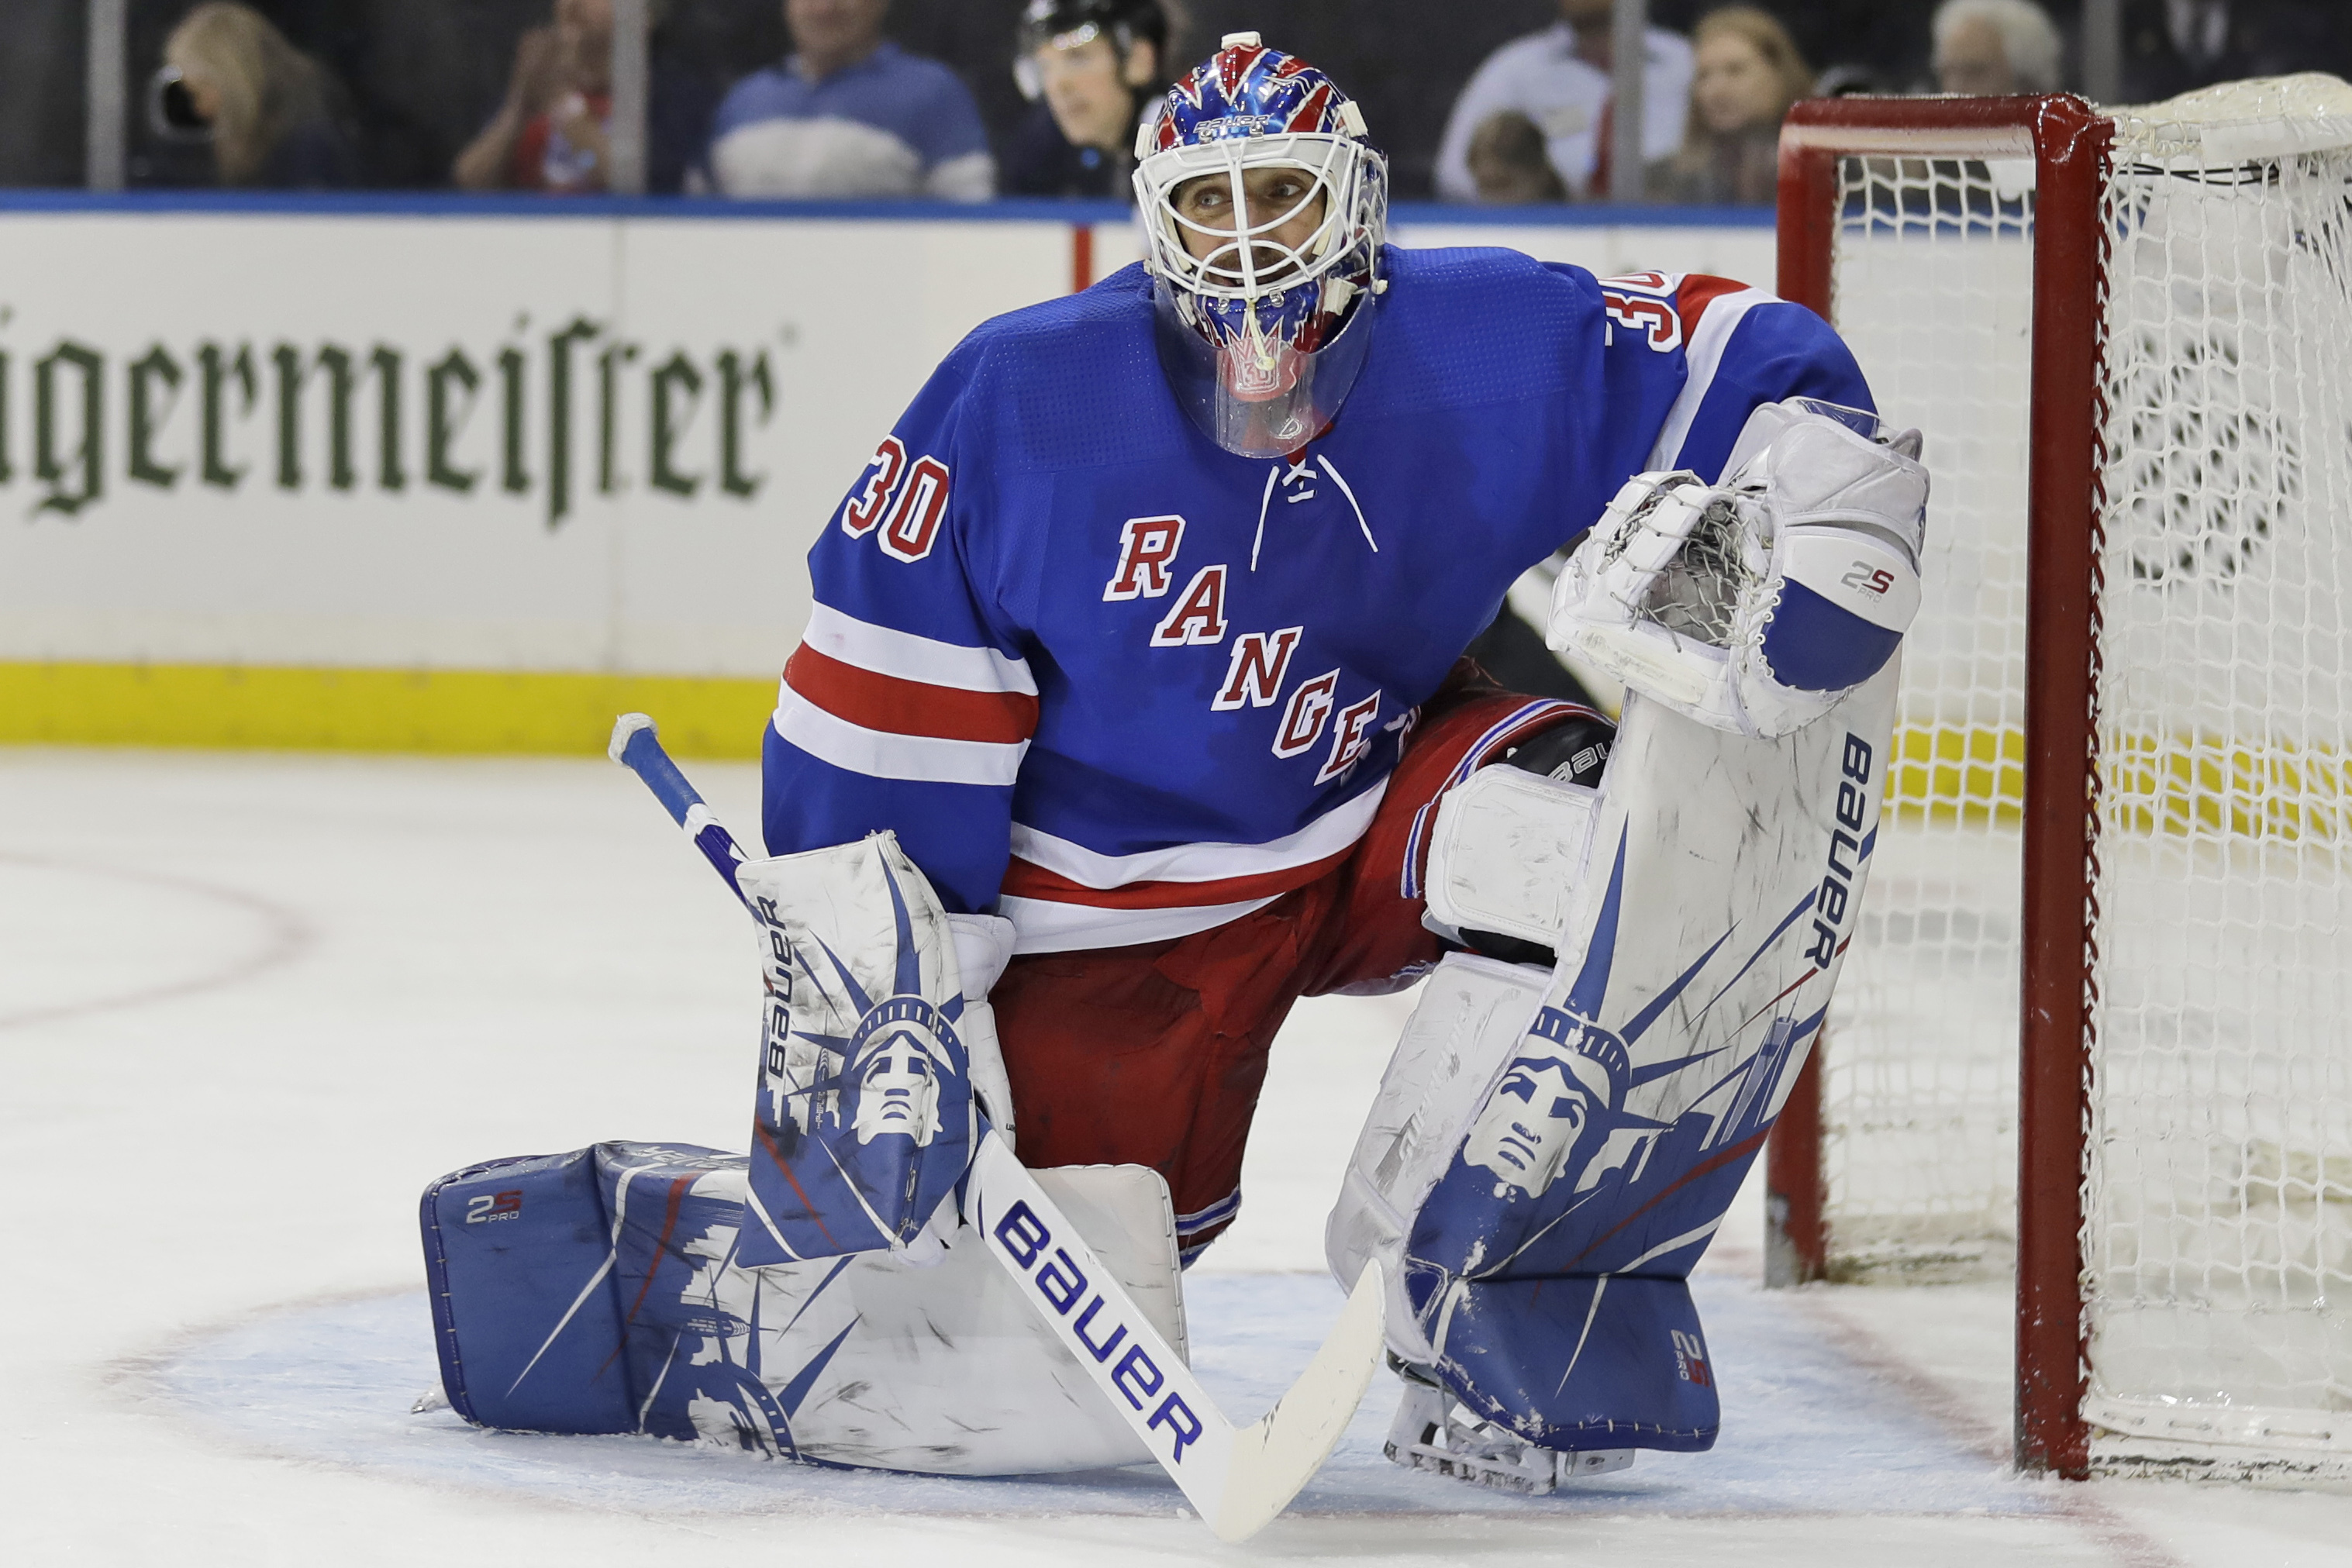 NY Rangers goalie Henrik Lundqvist: 'You just need to be patient